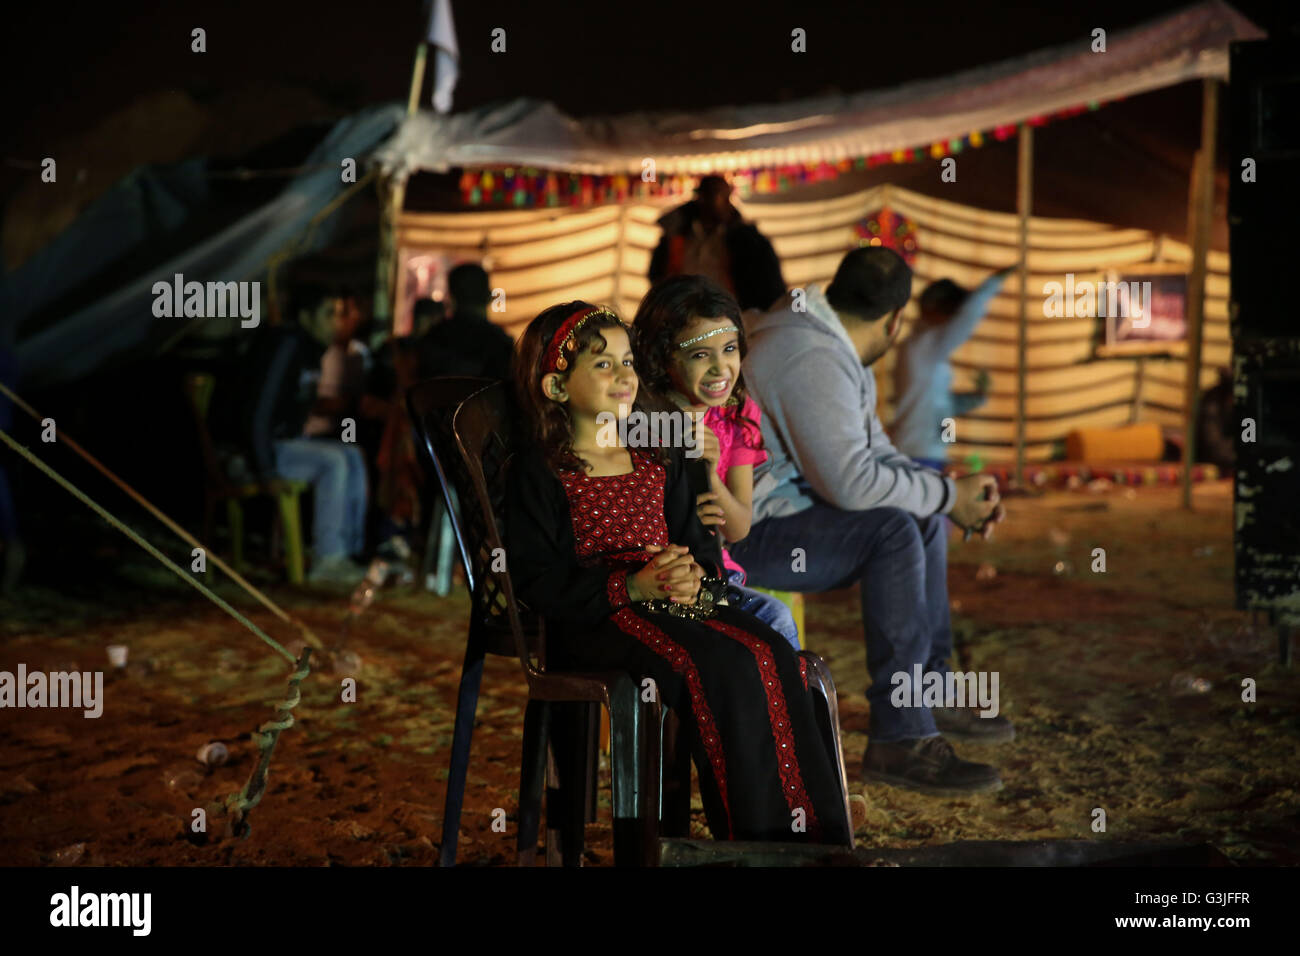 Gaza, Palestine. 10th Apr, 2016. Palestinian Bedouin girls near a fire during a Bedouin wedding in Beit Lahiya, northern of Gaza strip. Palestinians shows their traditional, Folklore and Bedouin heritage during the celebration of their wedding parties. © Mohammed Al Hajjar/RoverImages/Pacific Press/Alamy Live News Stock Photo